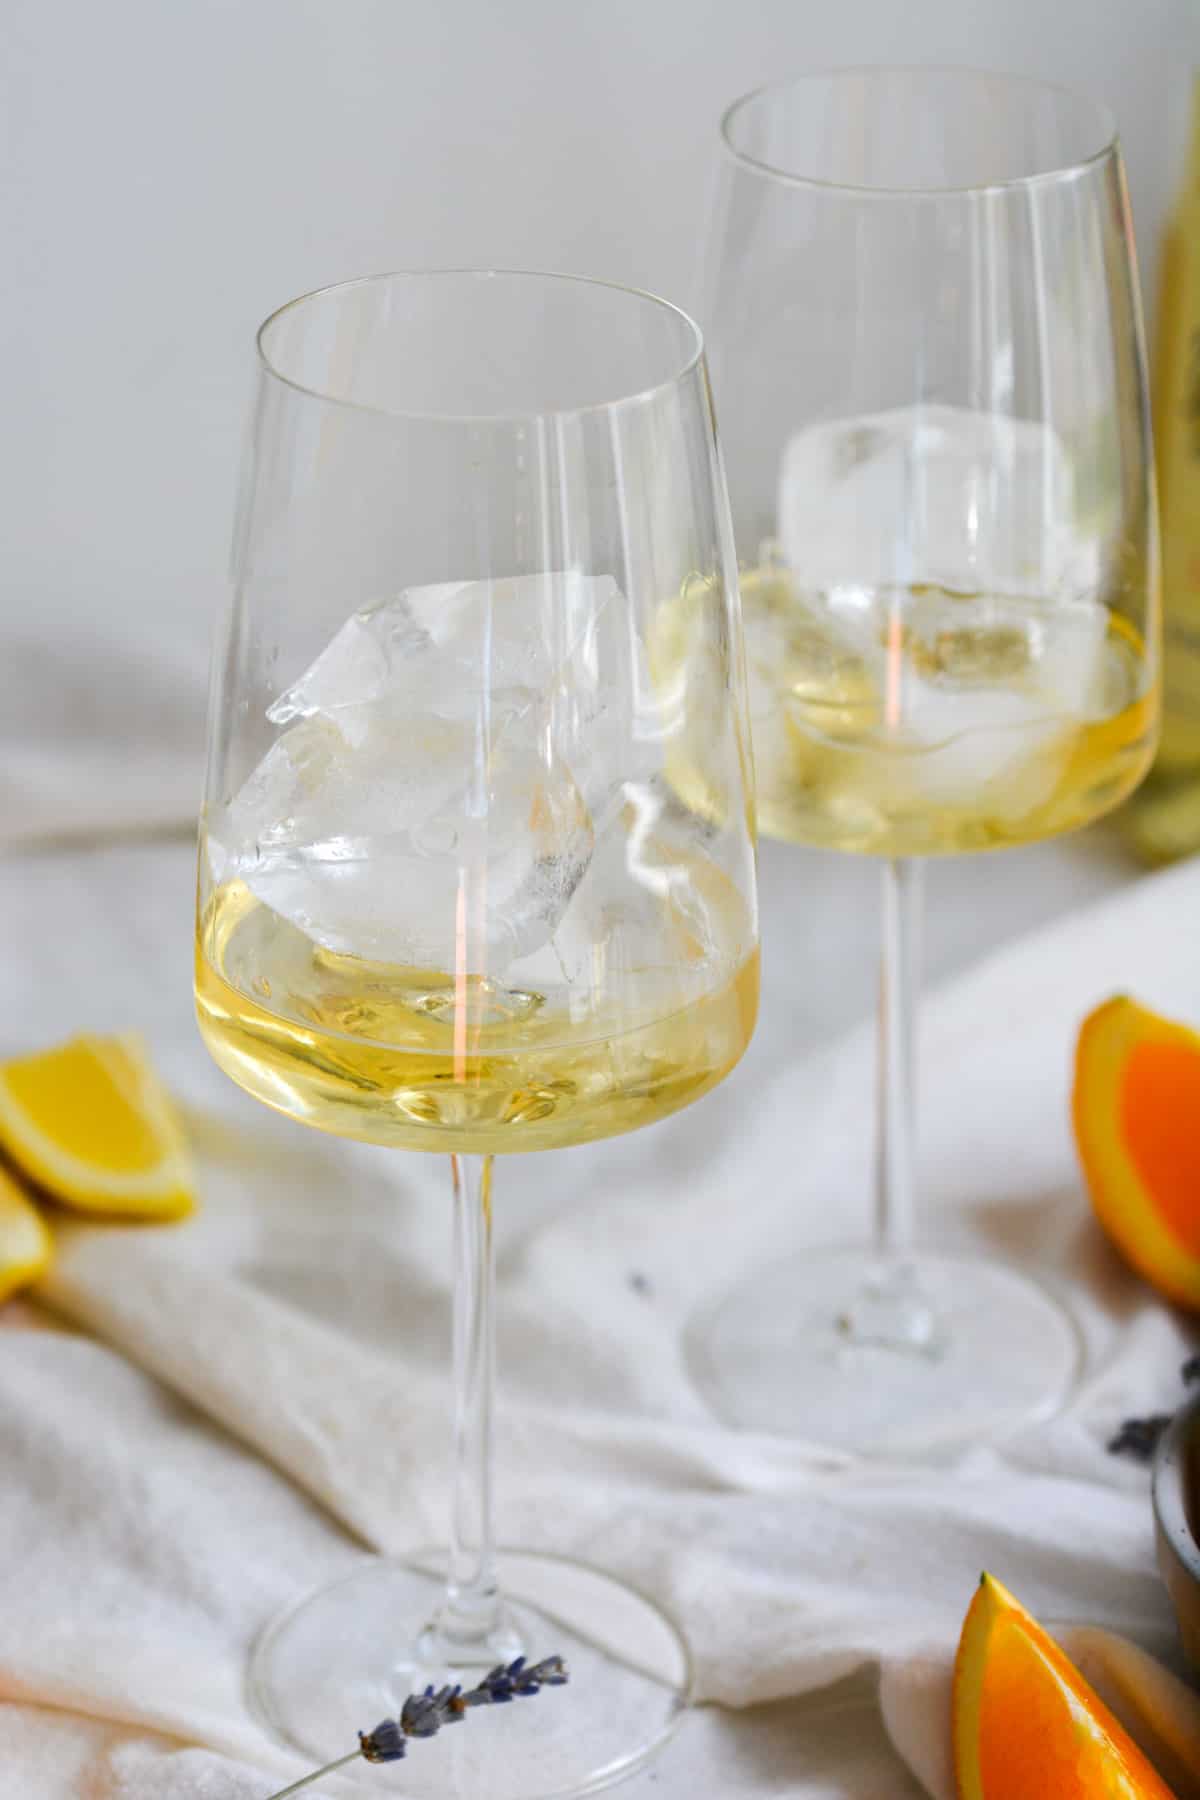 Lillet in a wine glass with ice cubes